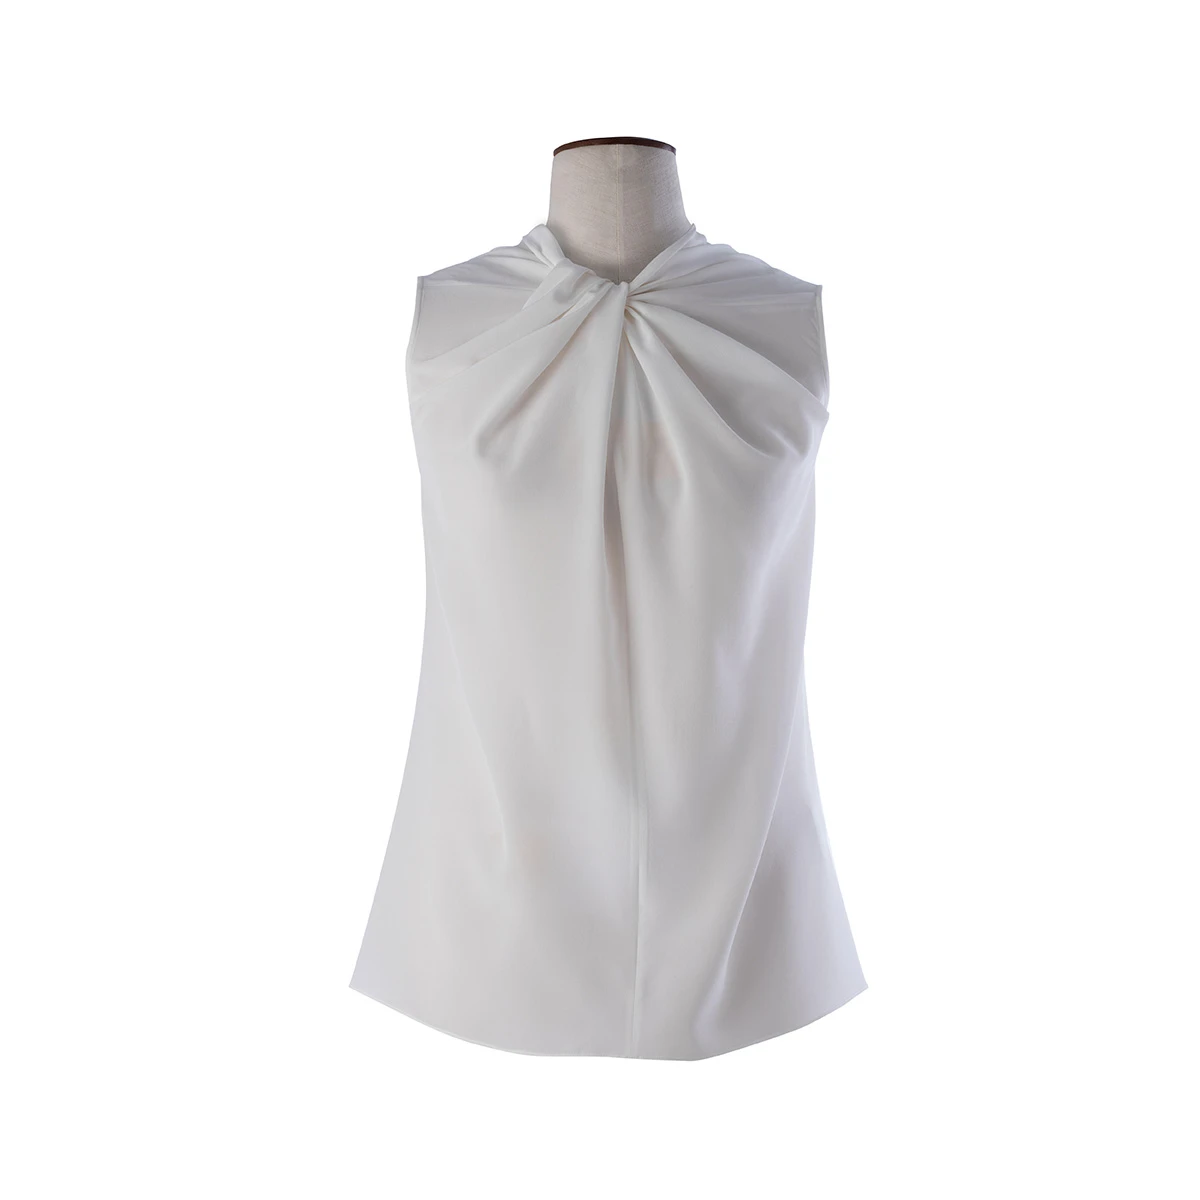 New Fashion Trend Woman draped blouse Sleeveless blouse -  Fashion blouse 100% Silk Made in Italy